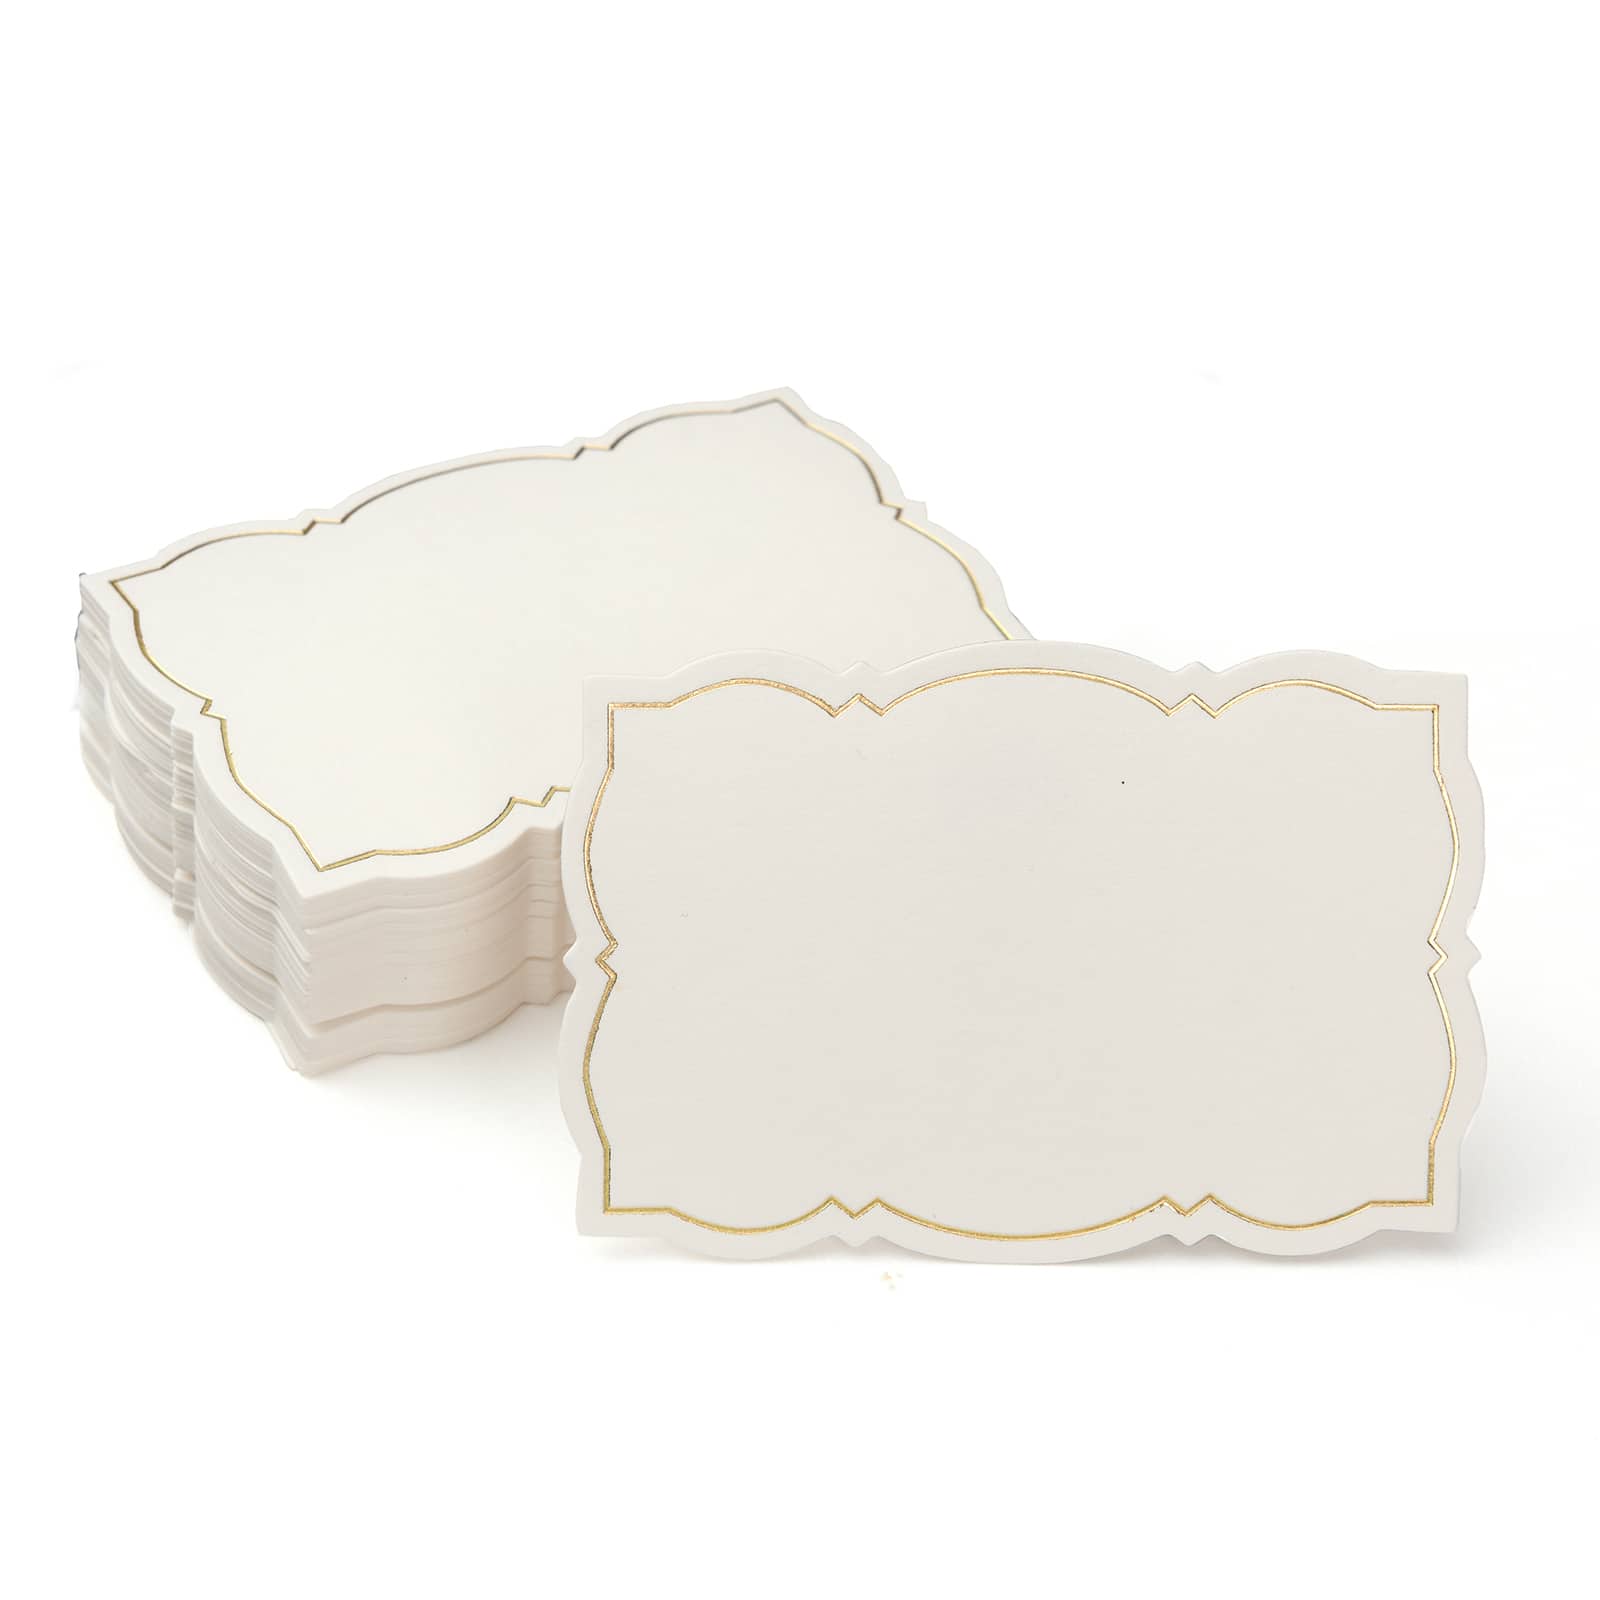 6 Packs: 50 ct. (300 total) Style Me Pretty Gold Place Cards